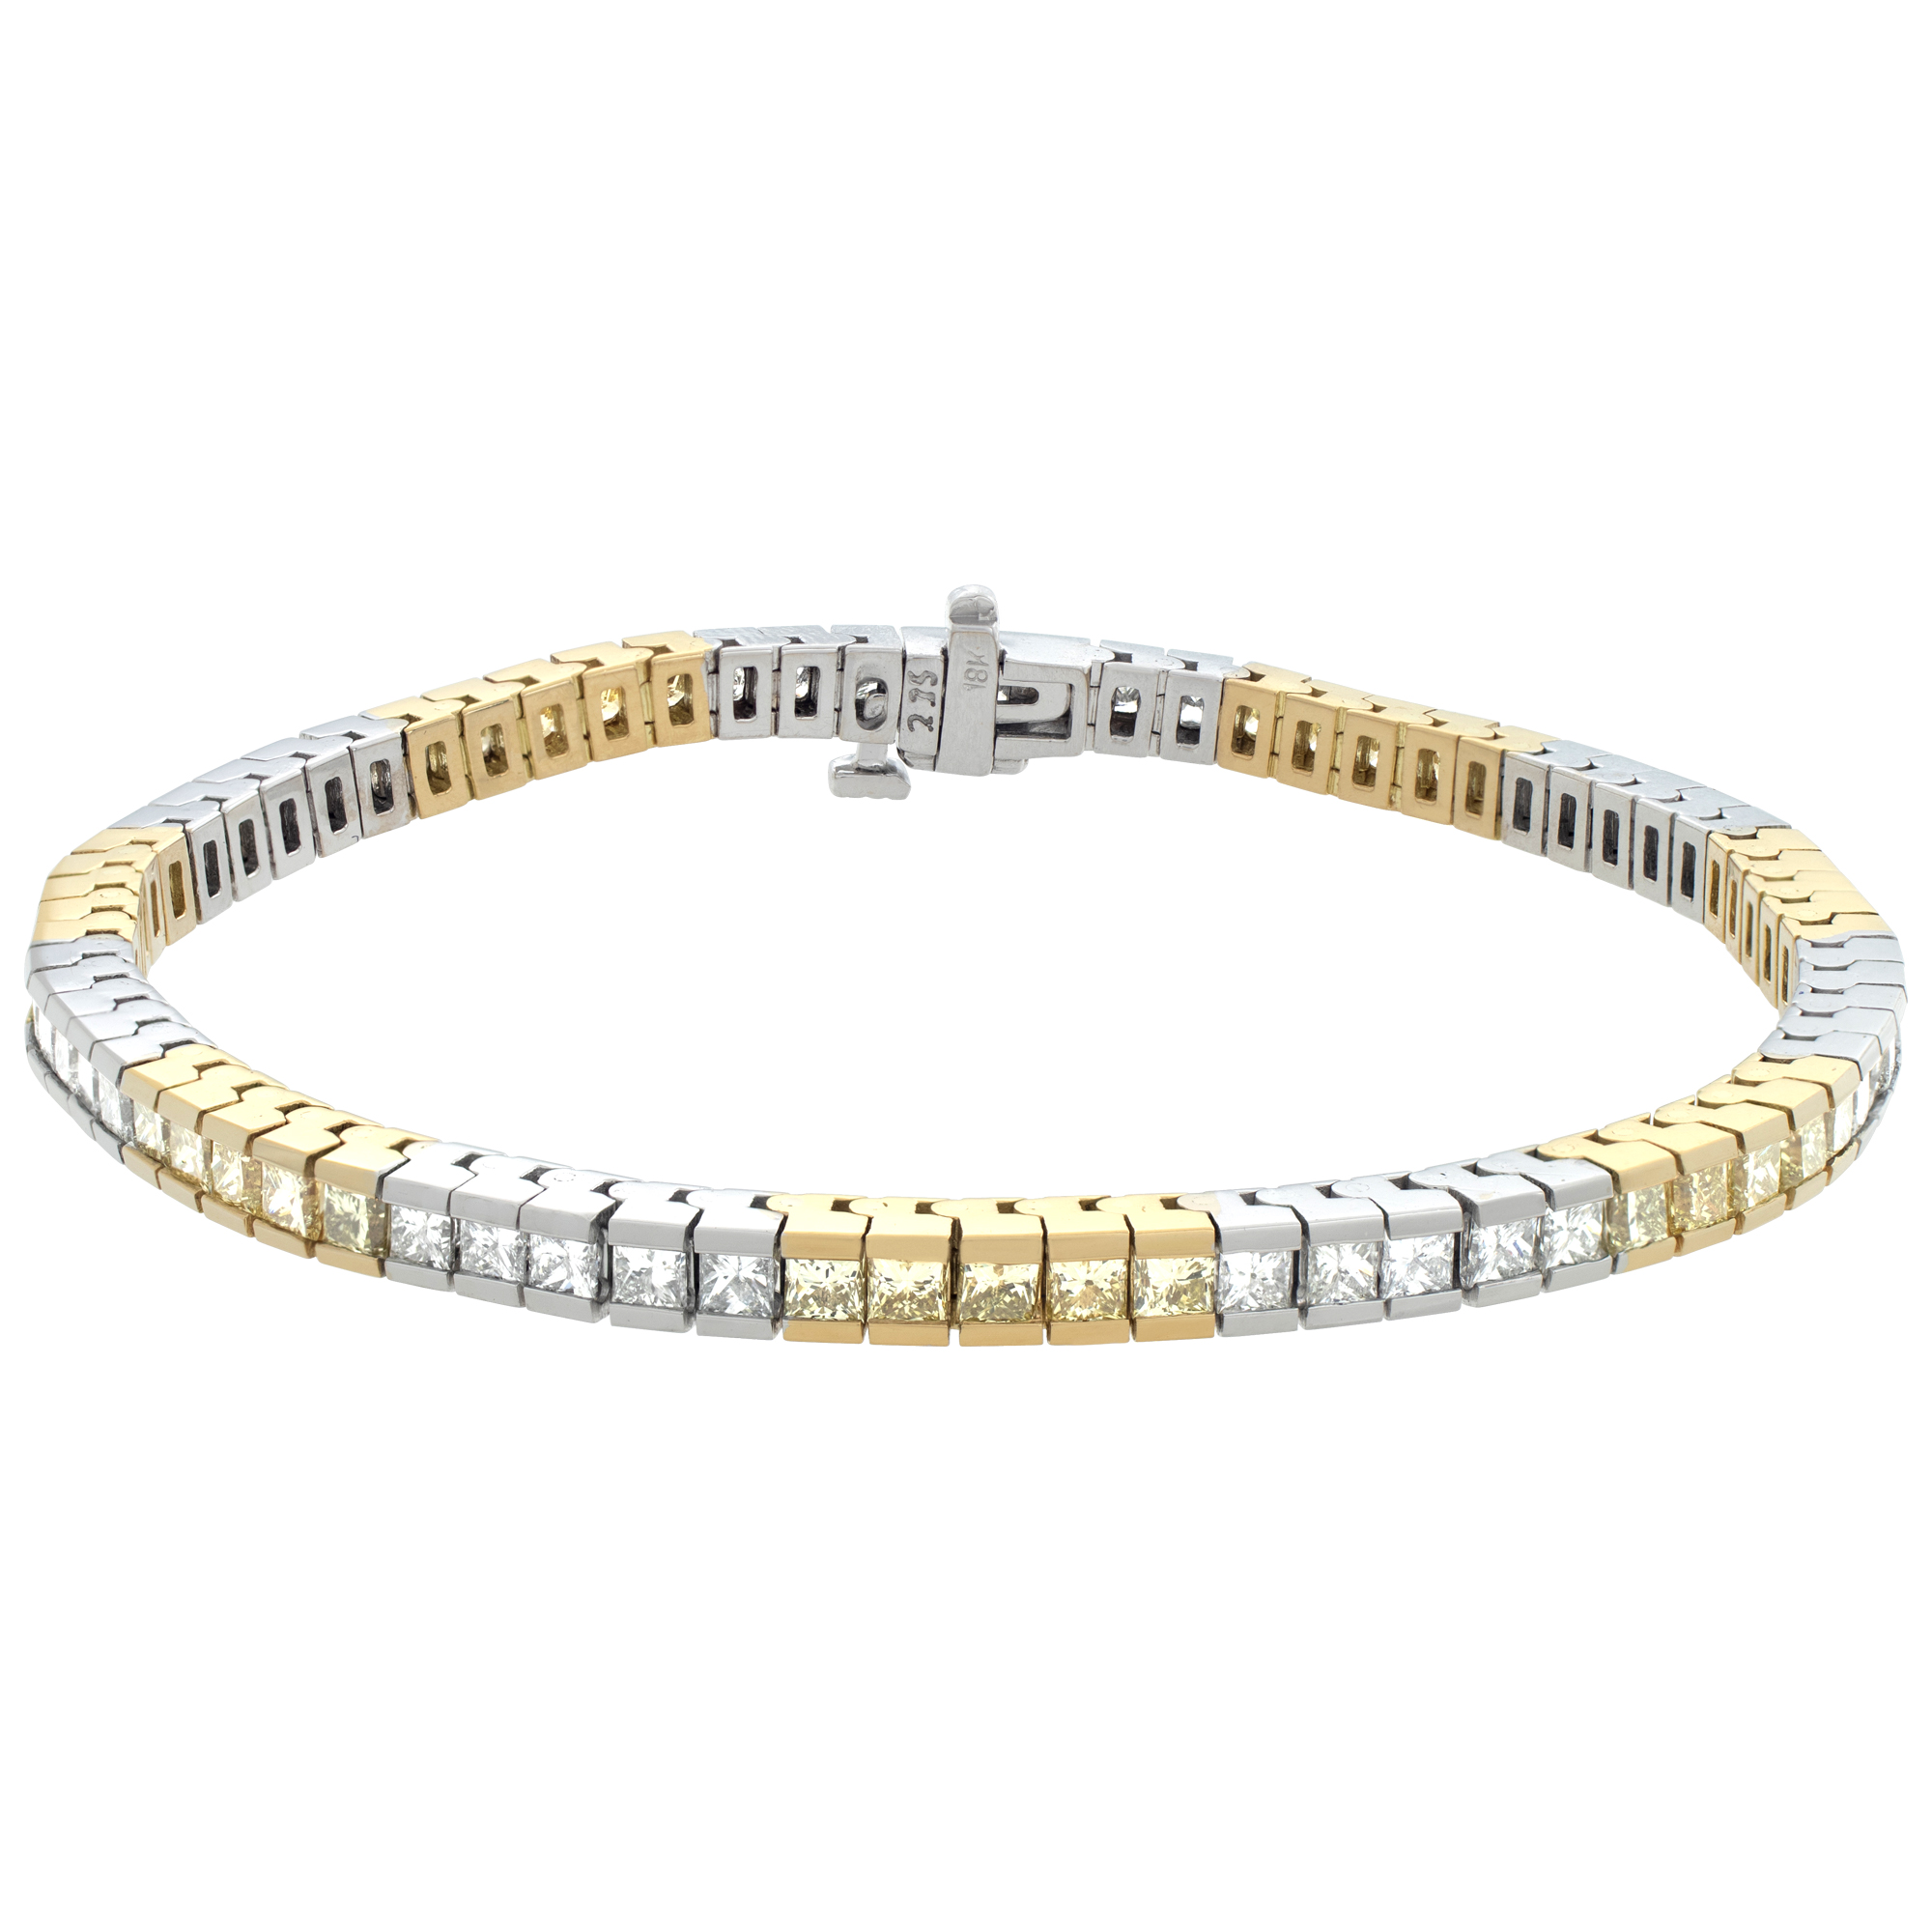 18k white and yellow gold bracelet with white and yellow diamonds.